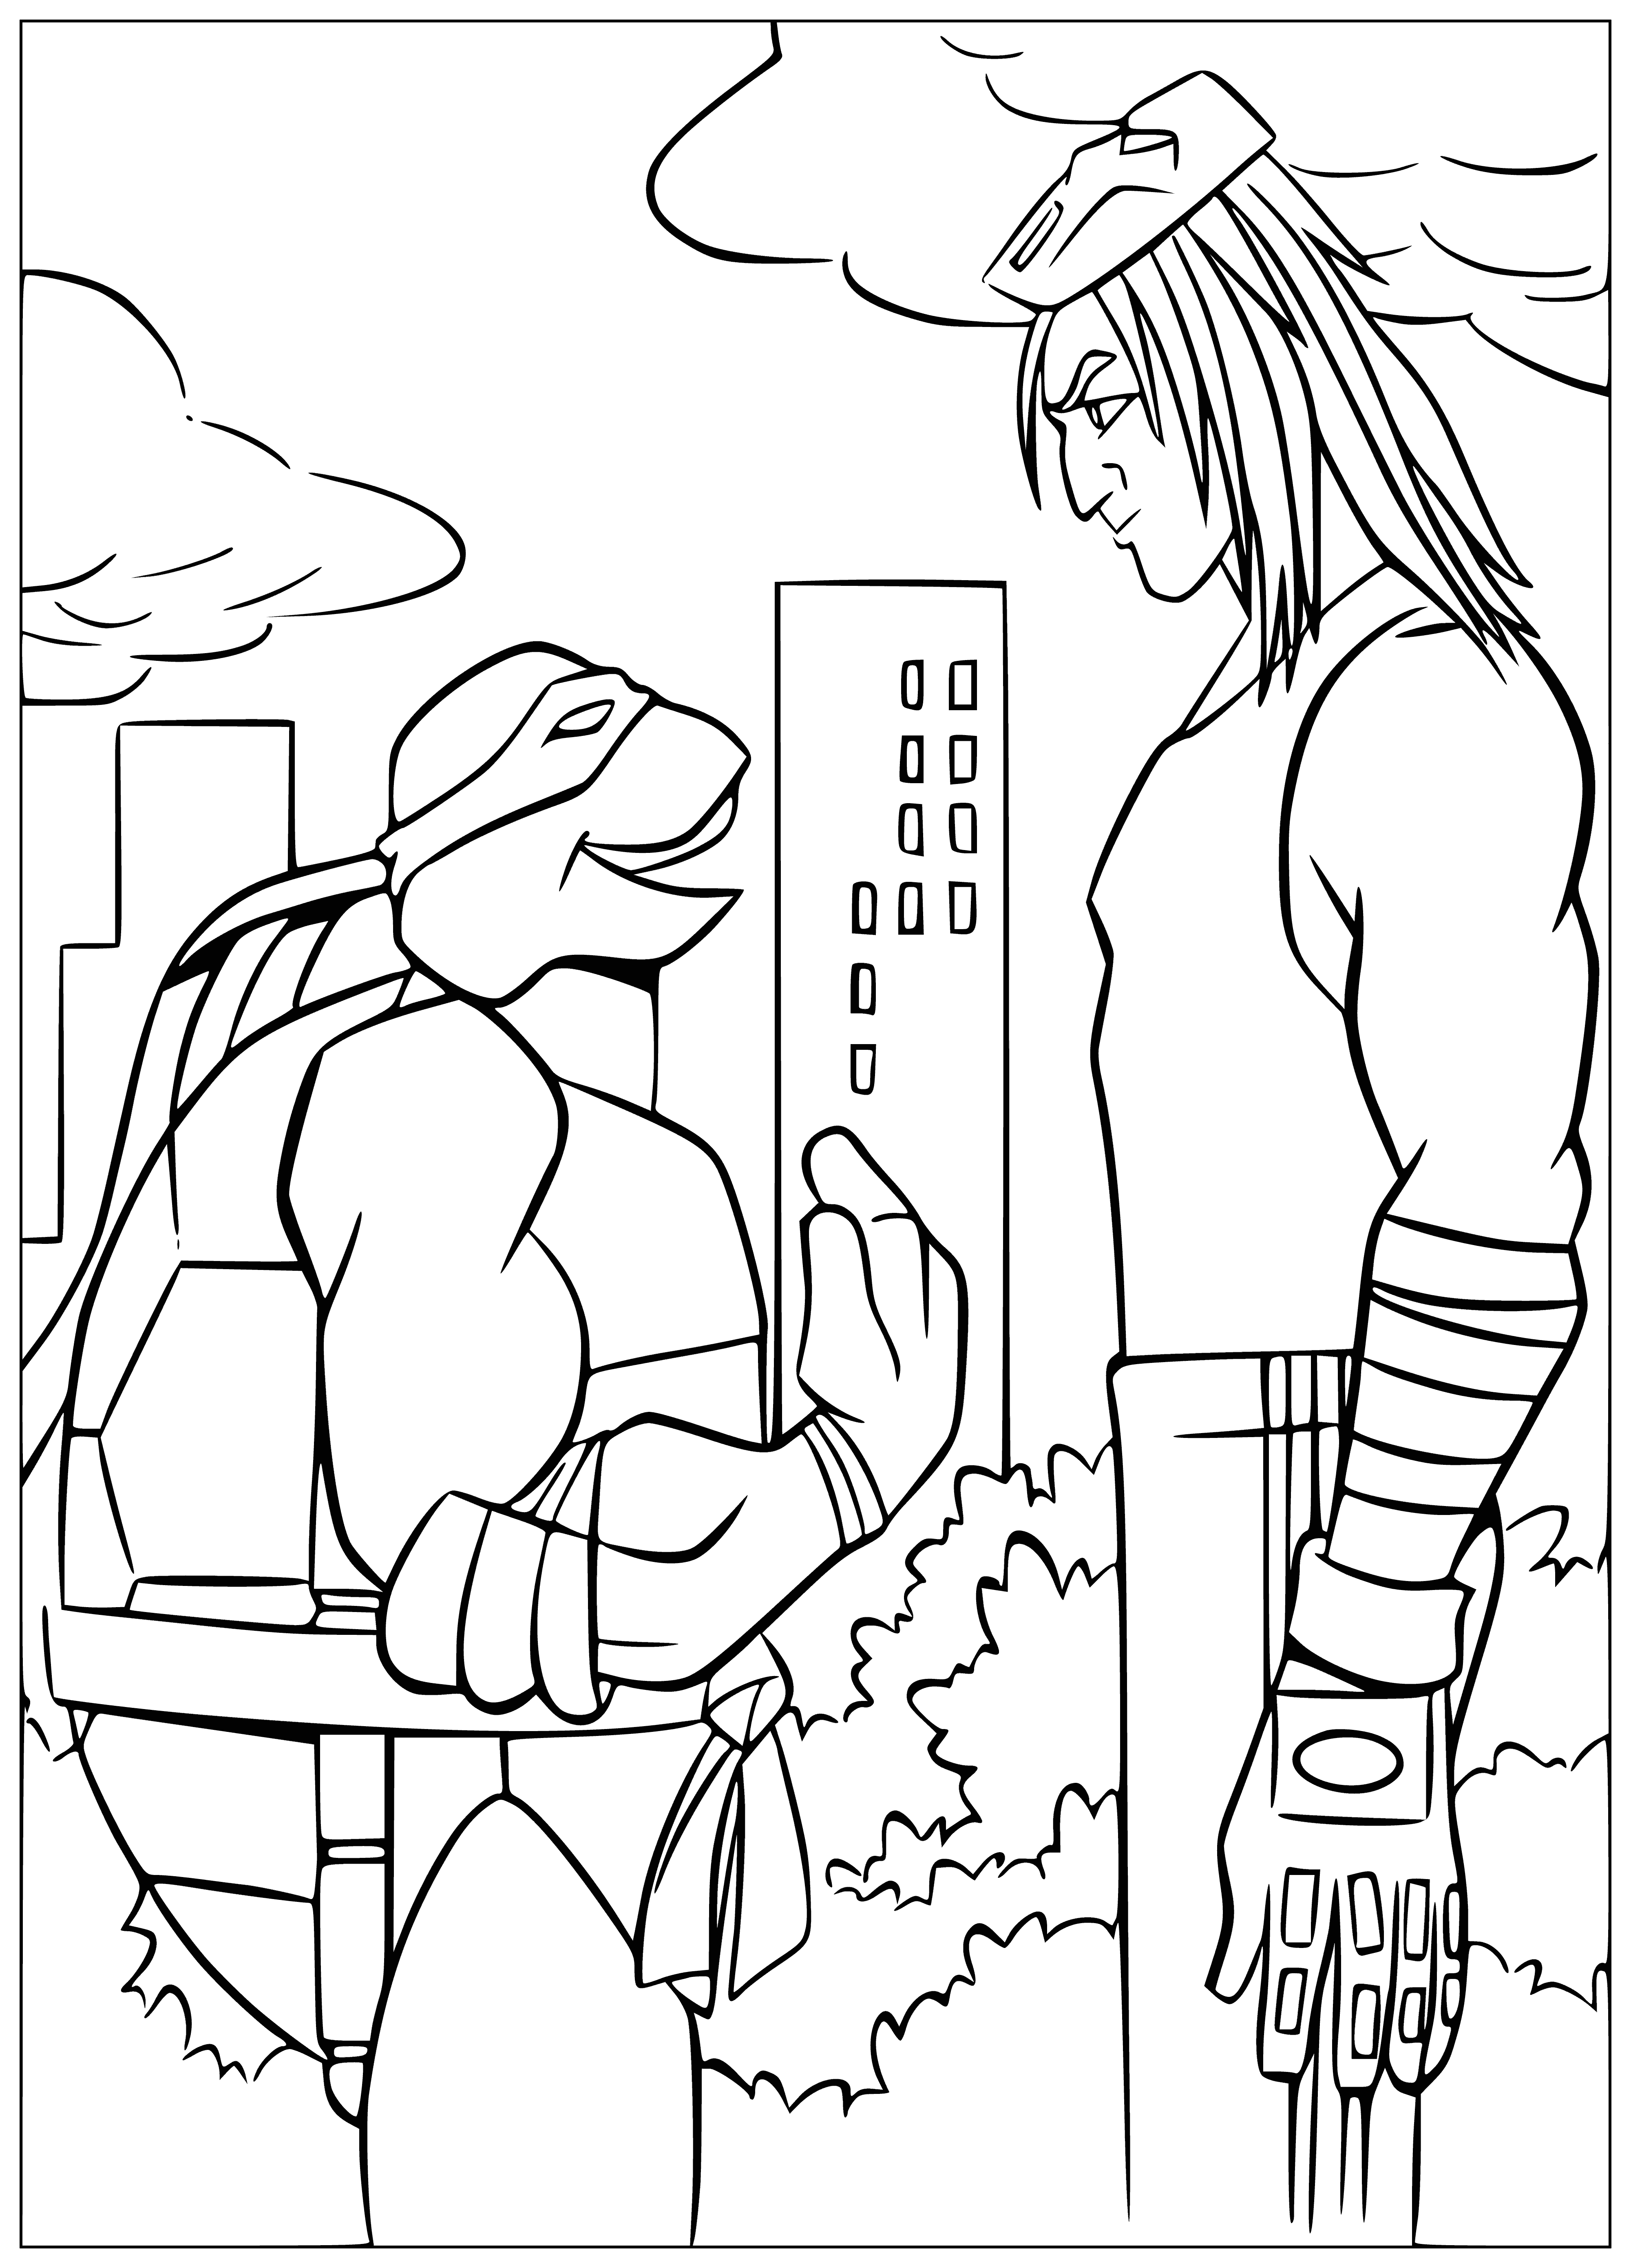 Turtle and Athlete coloring page